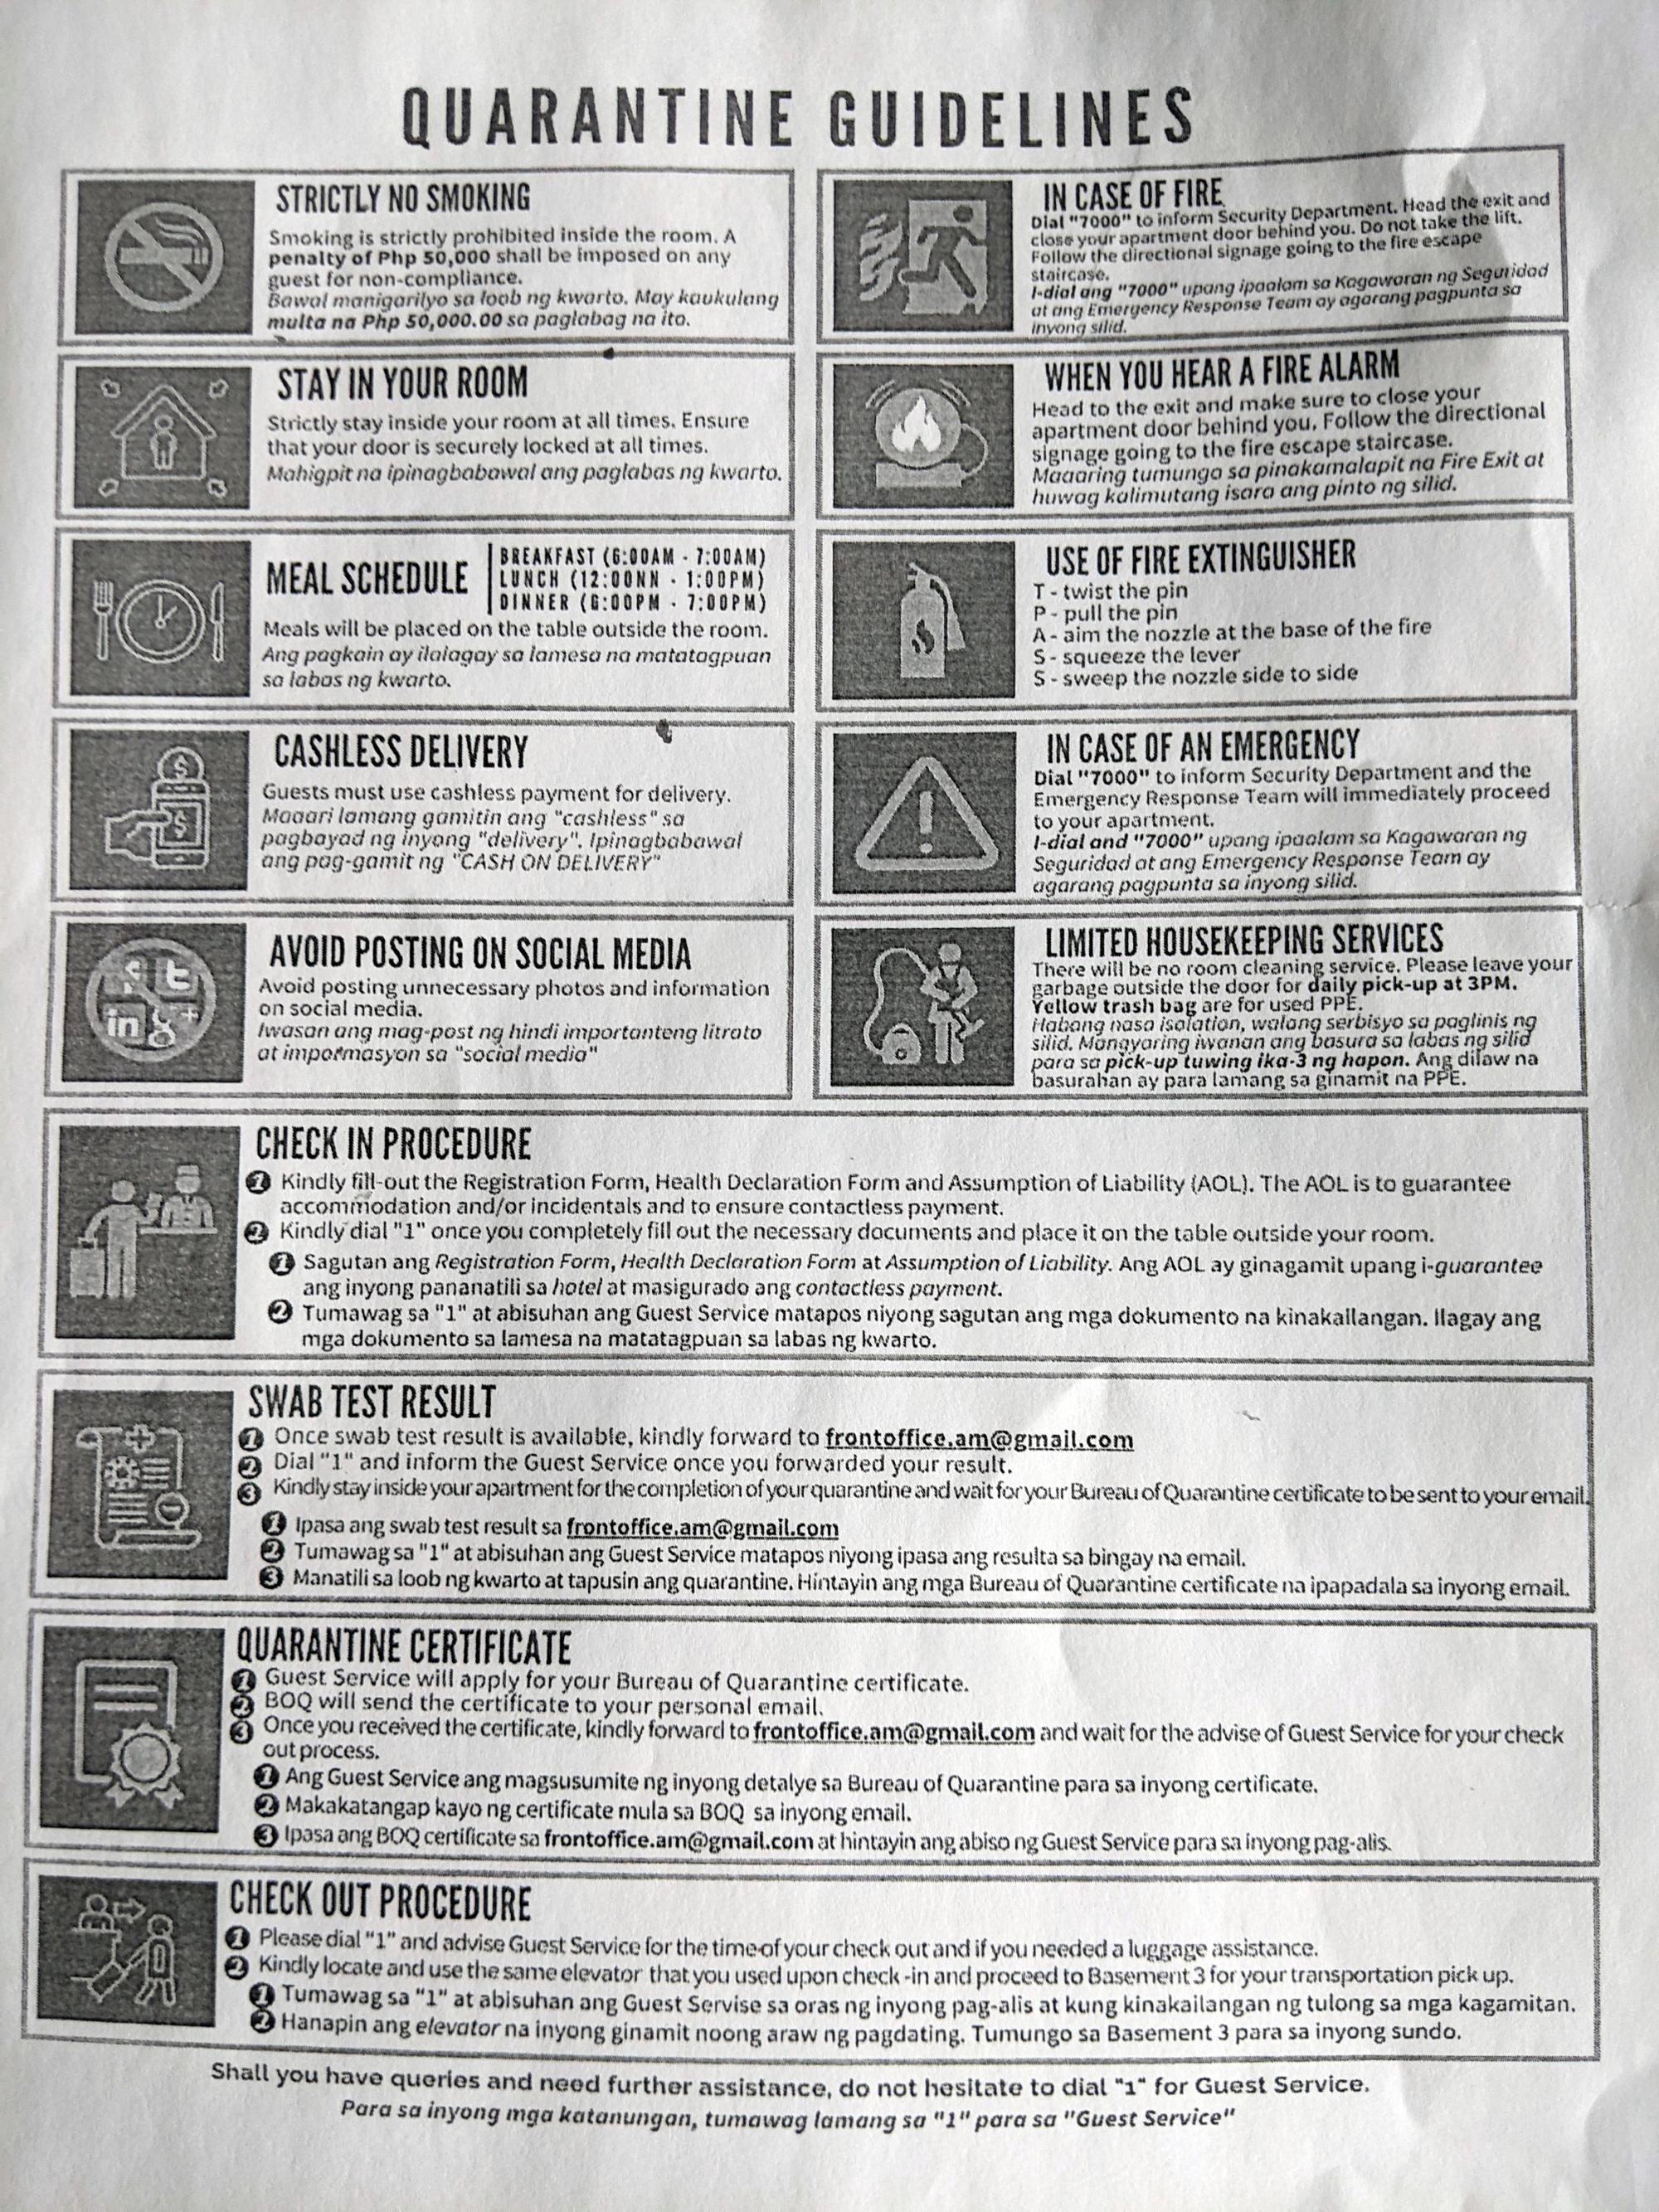 Signs of the Philippines - Quarantine Guidlines